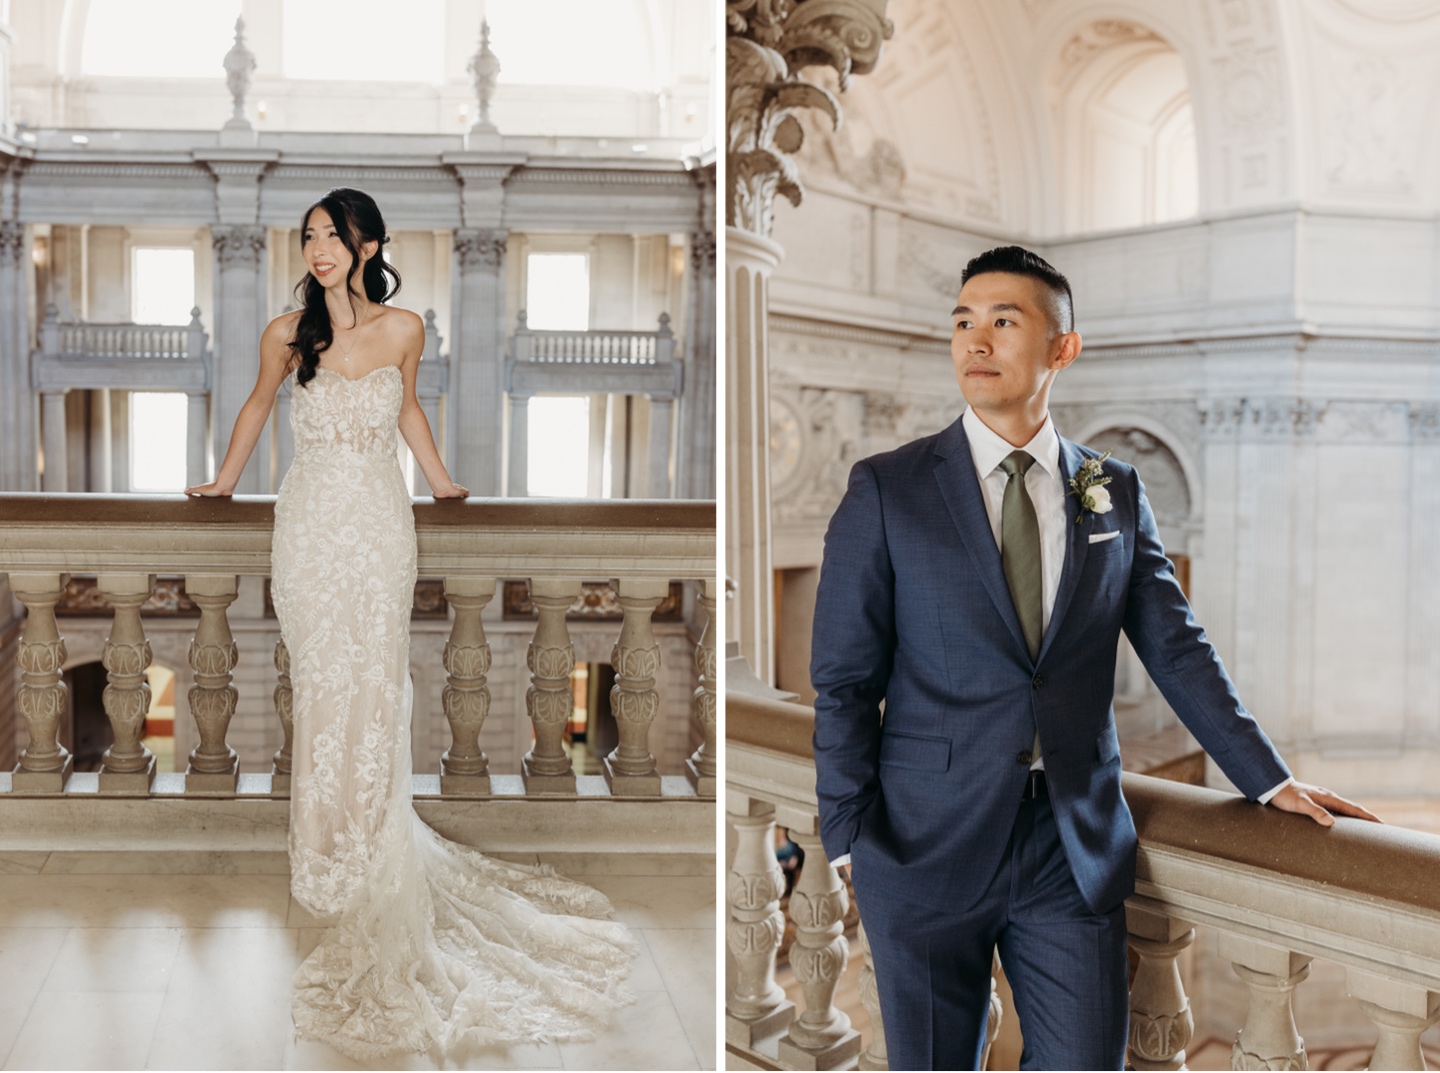 Solo photos of the bride and groom in San Francisco City Hall. Liz Koston Photography.